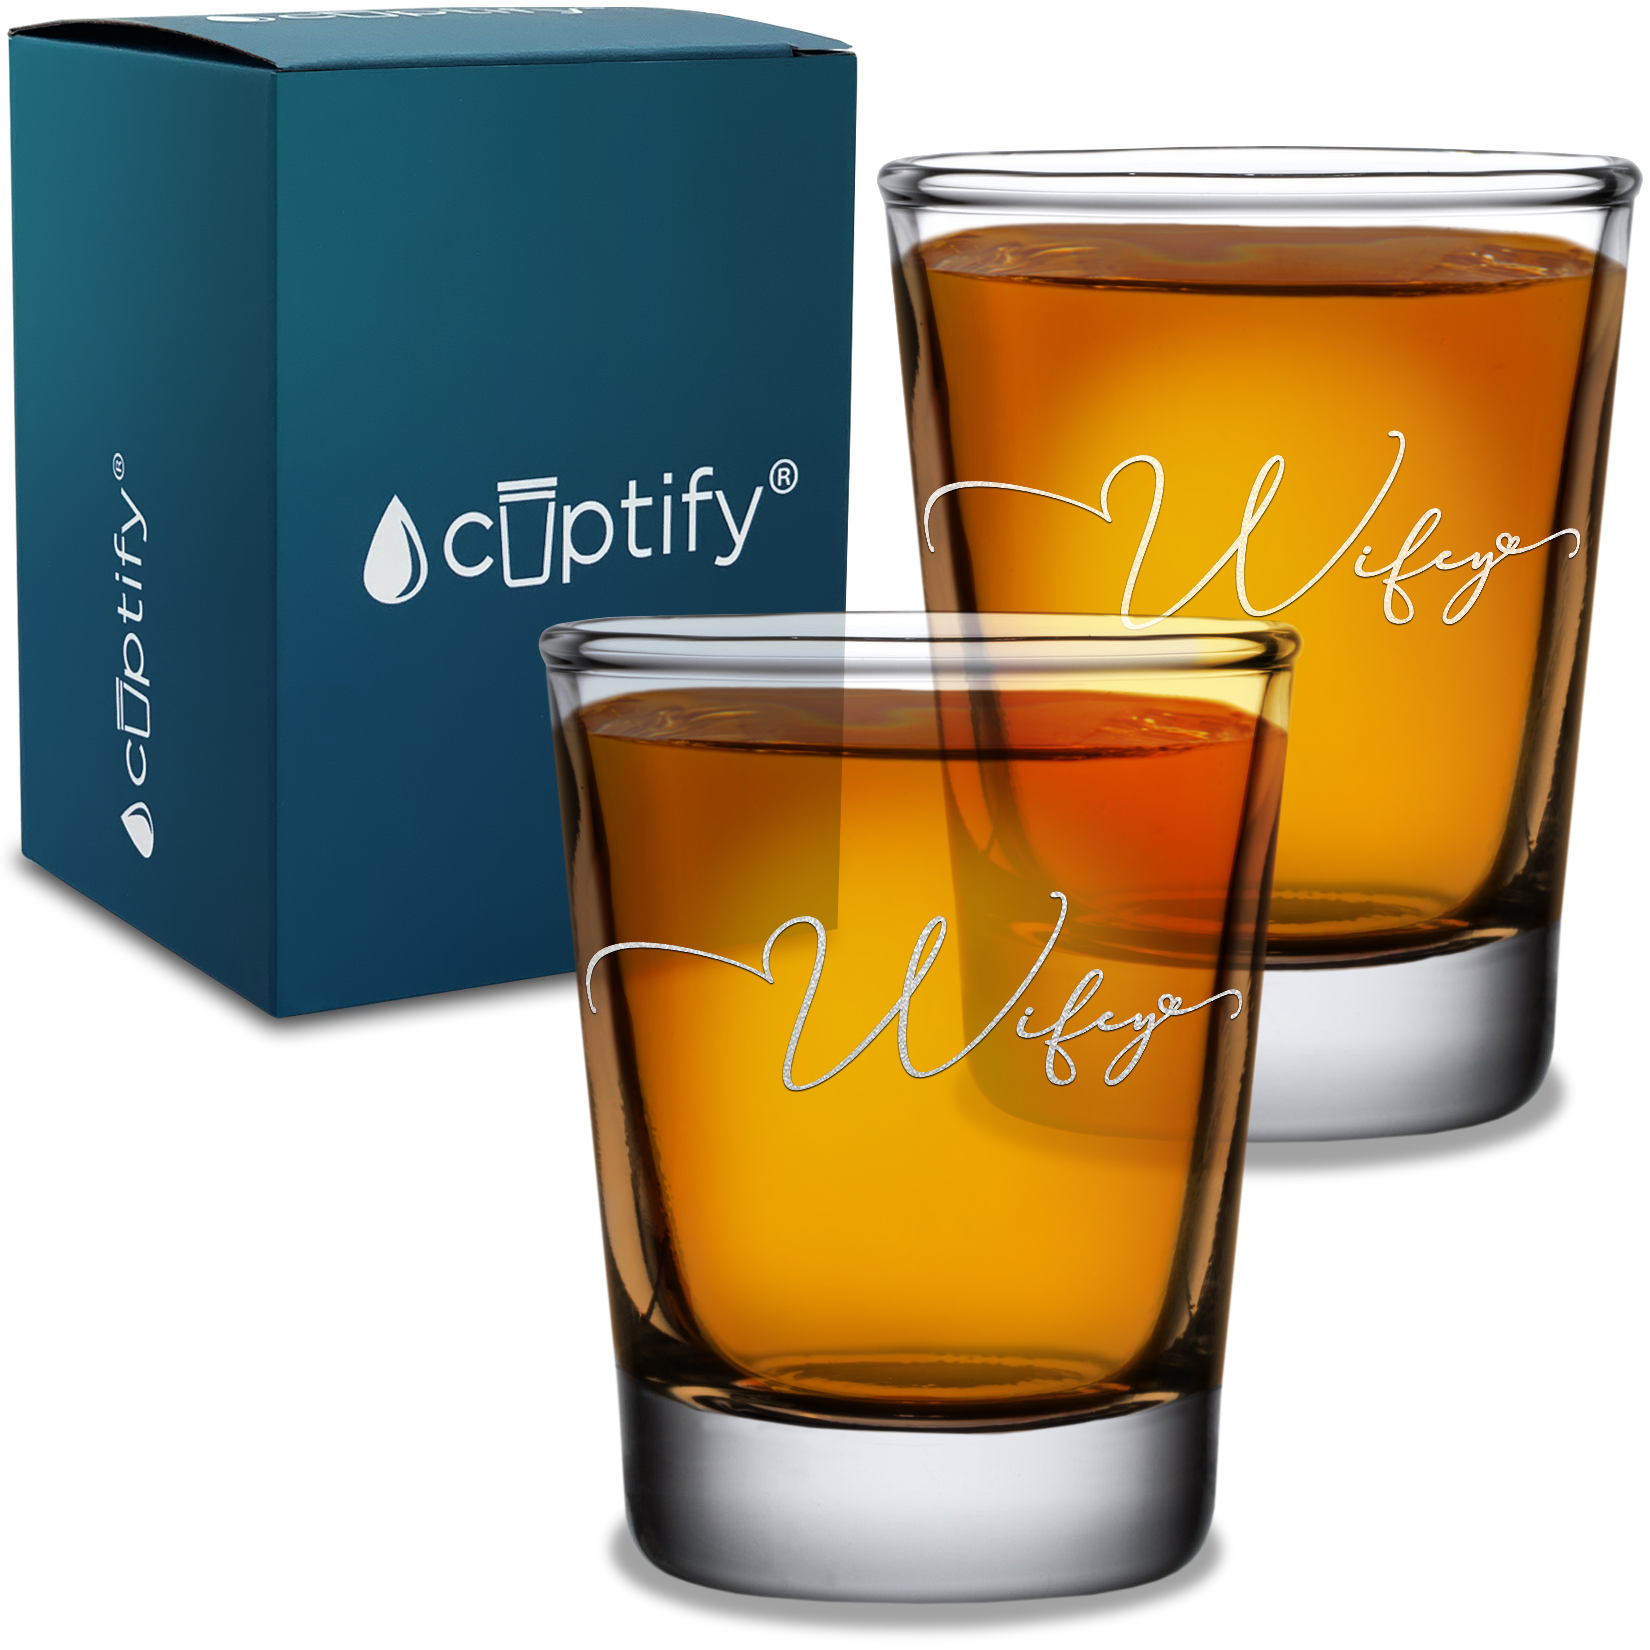  Wifey Etched on 2oz Shot Glasses - Set of 2